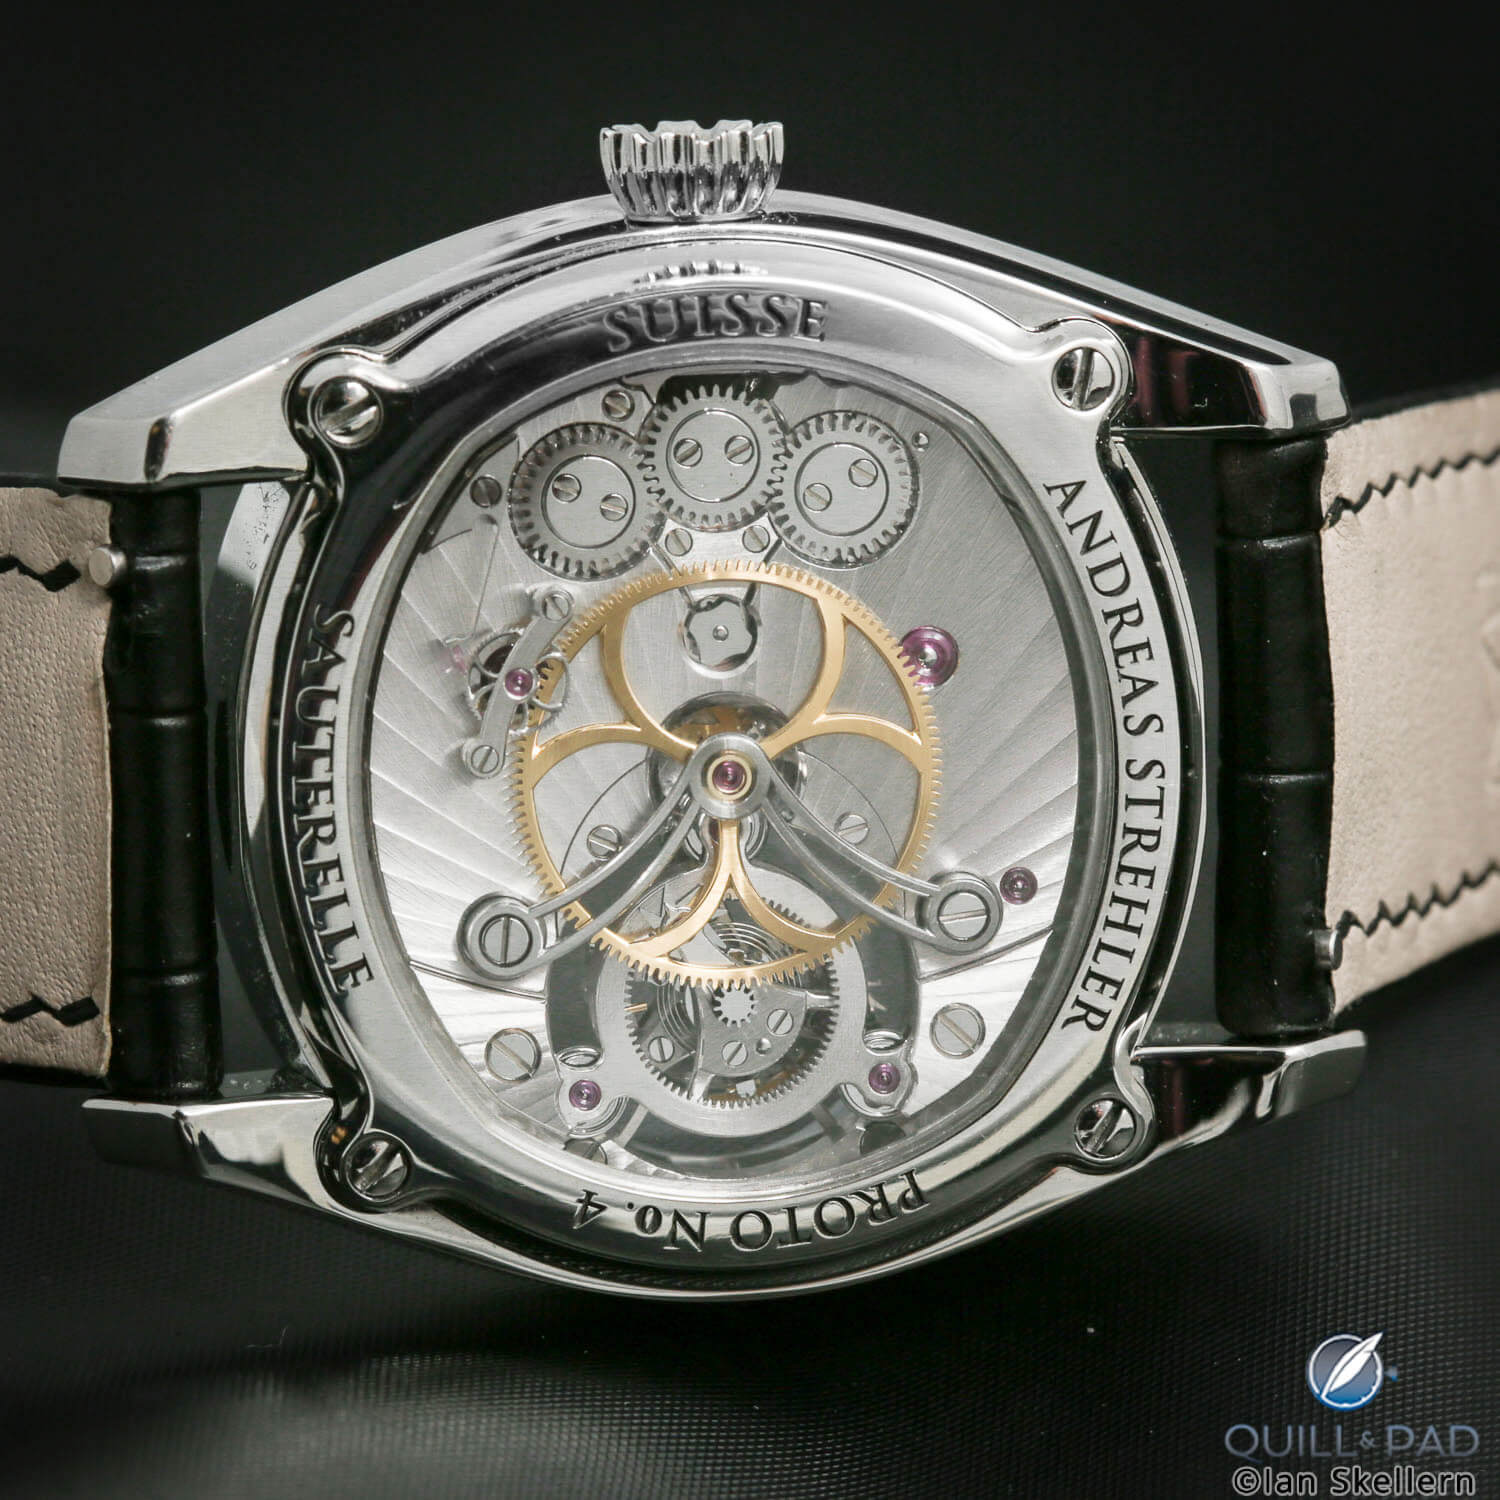 View through the display back of the Andreas Strehler Trans-Axial Remontoir Tourbillon